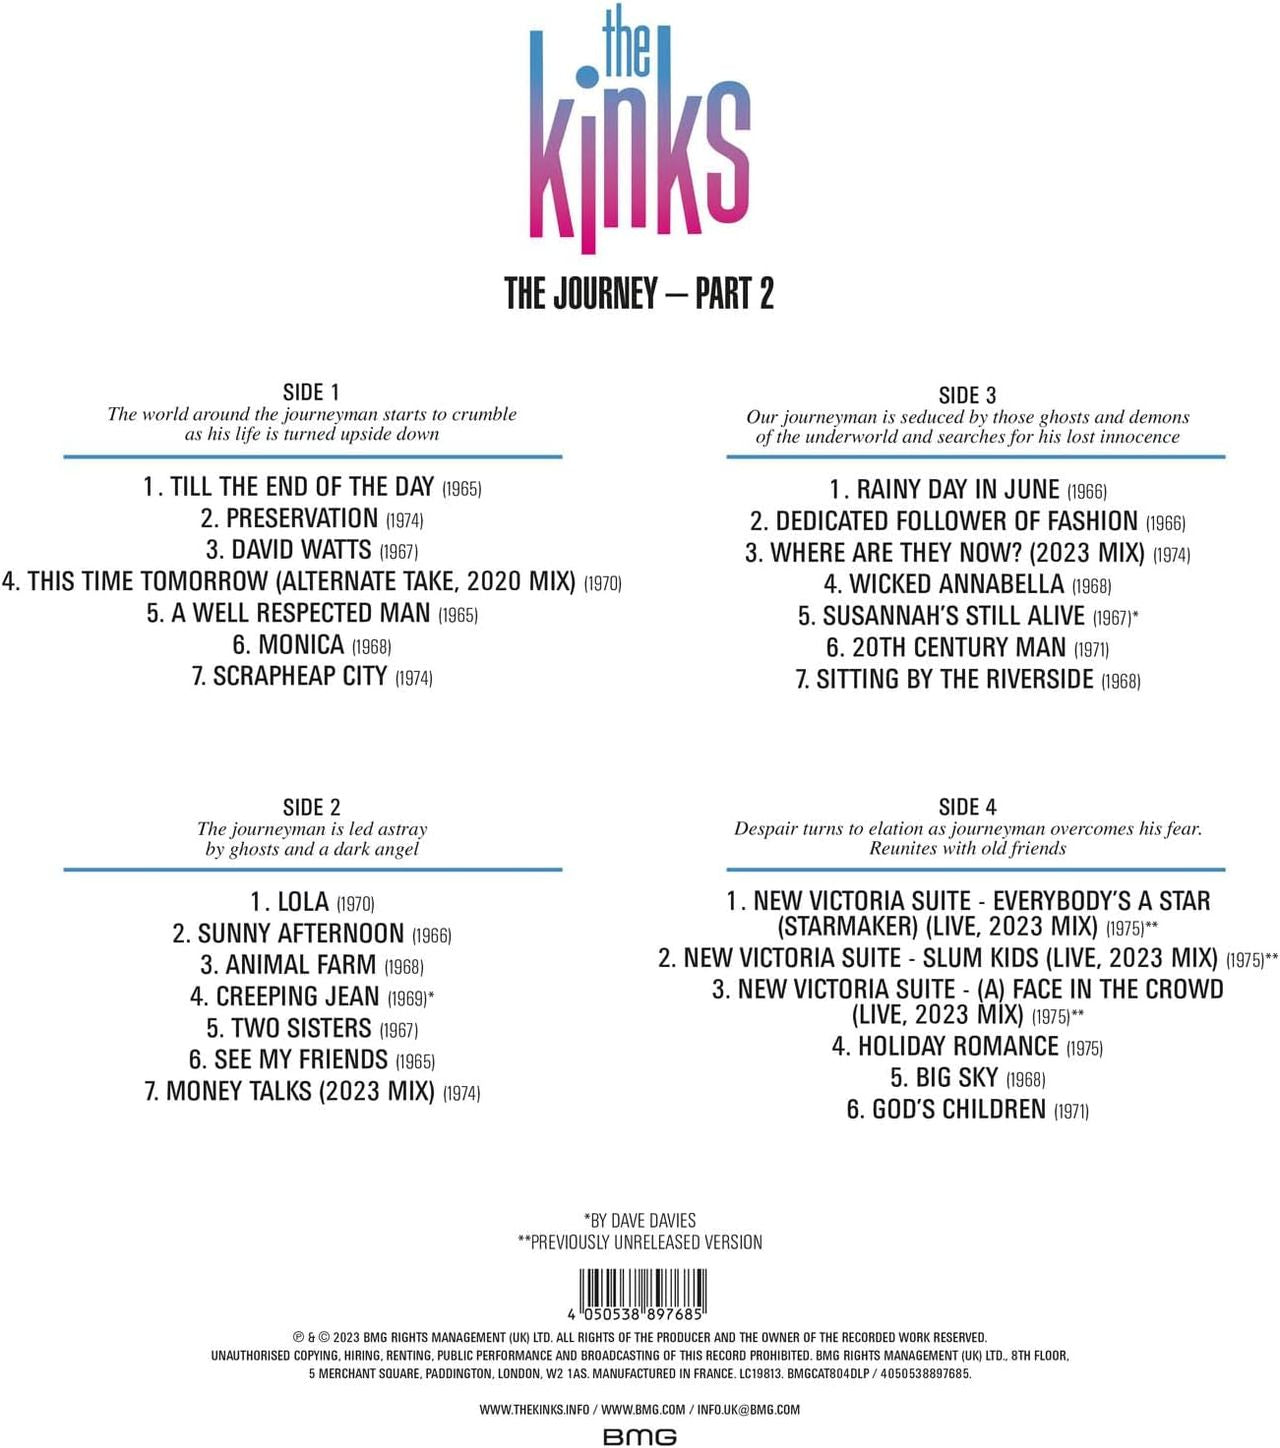 The Kinks - The Journey - Part 2 (Anthology) (2LP)